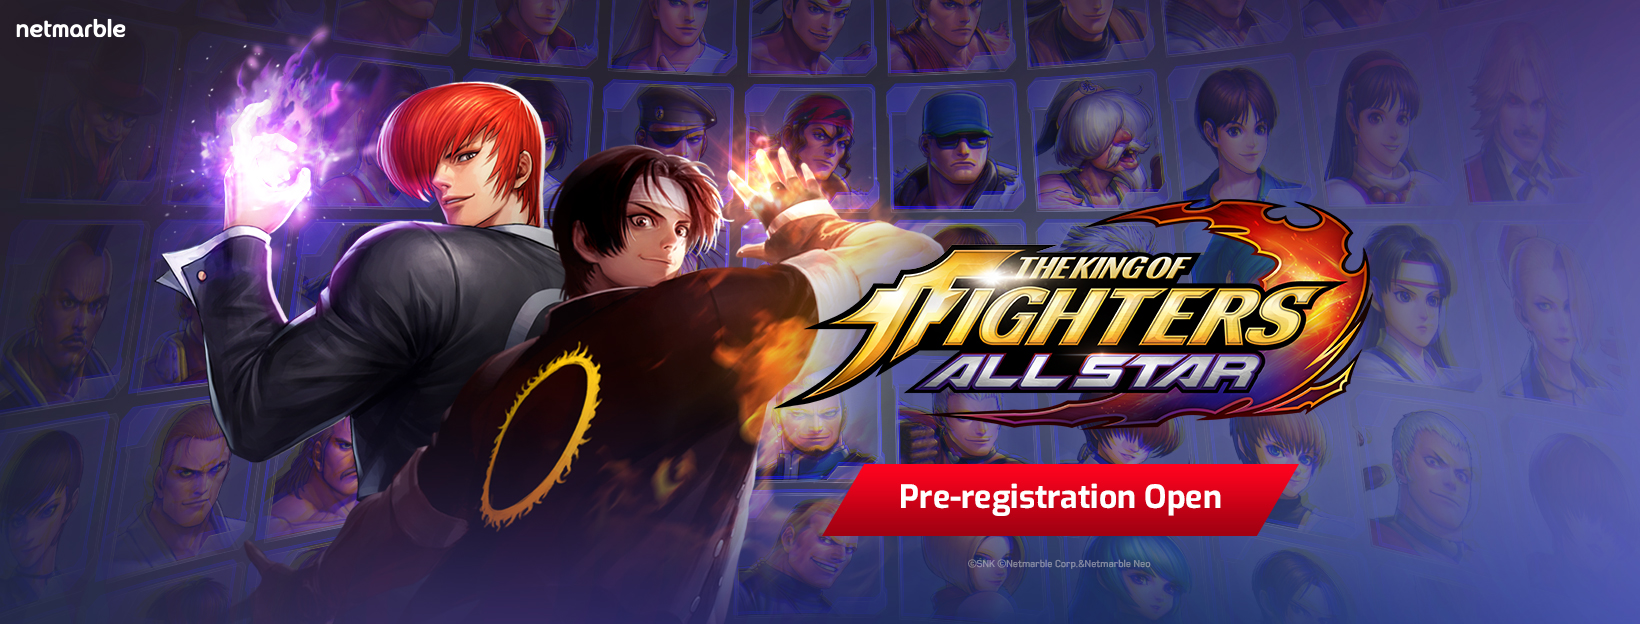 Netmarble launcher pc. Netmarble King. The of King Fighter Allstar все башни. Soul King Netmarble.